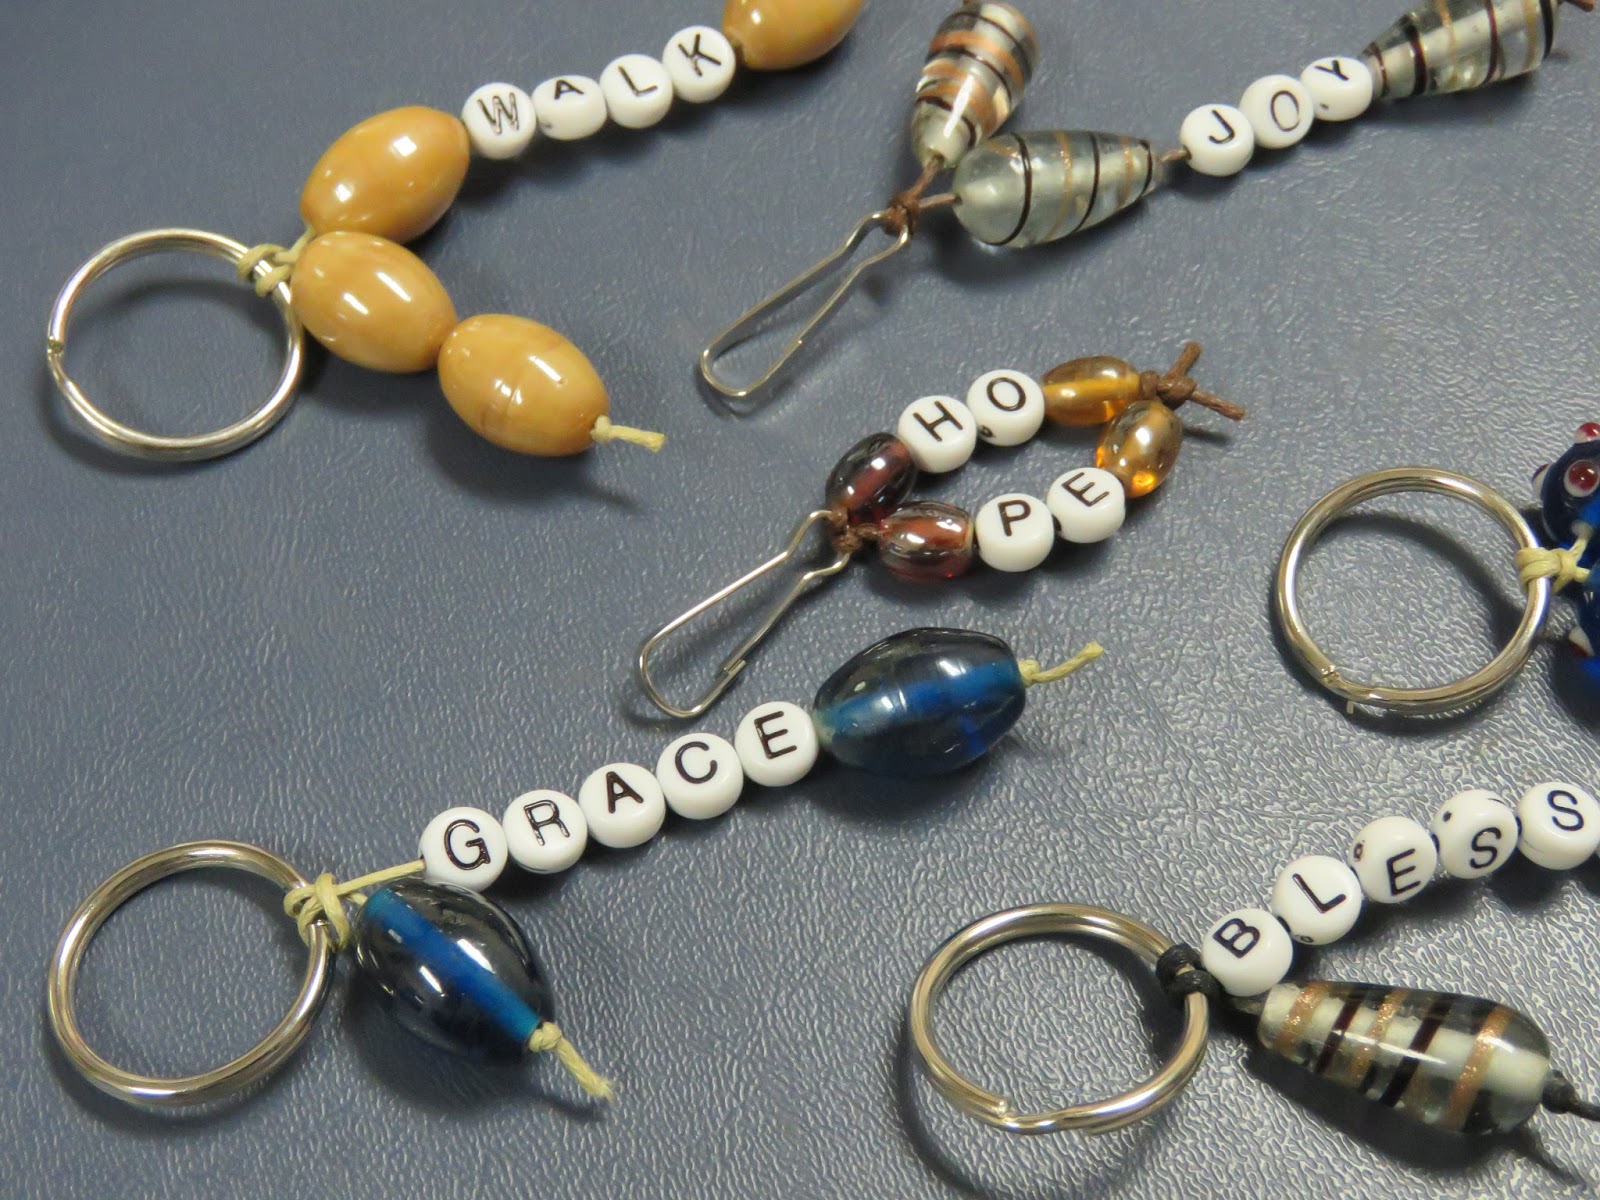 How to Make Beaded Keychains: A Simple Tutorial for Beginners